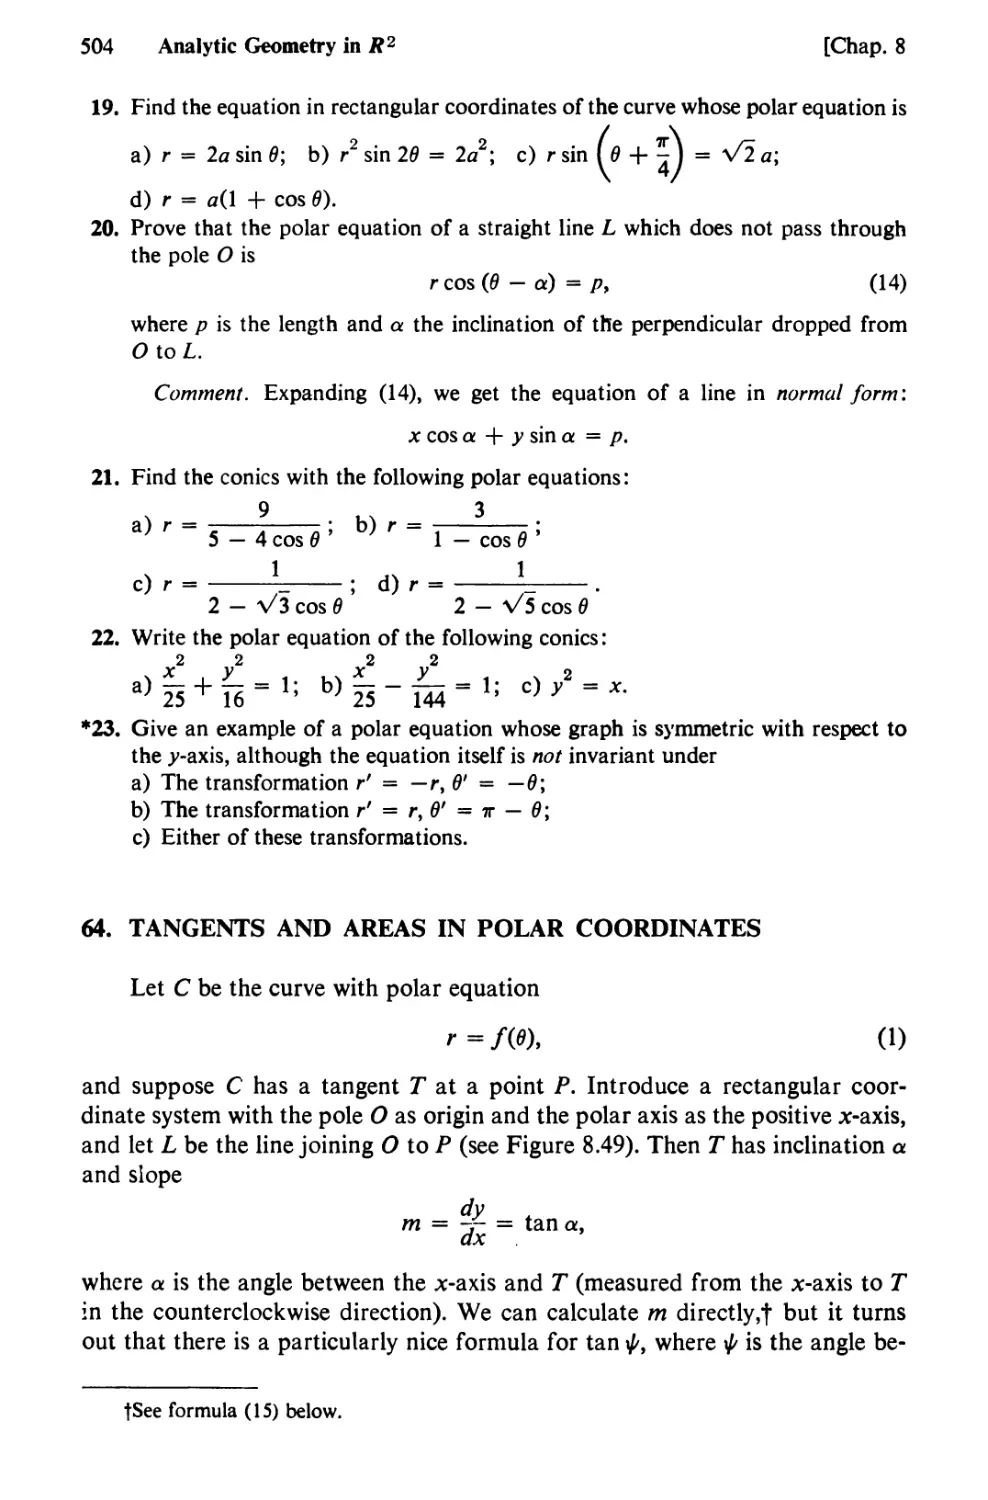 64. Tangents and Areas in Polar Coordinates